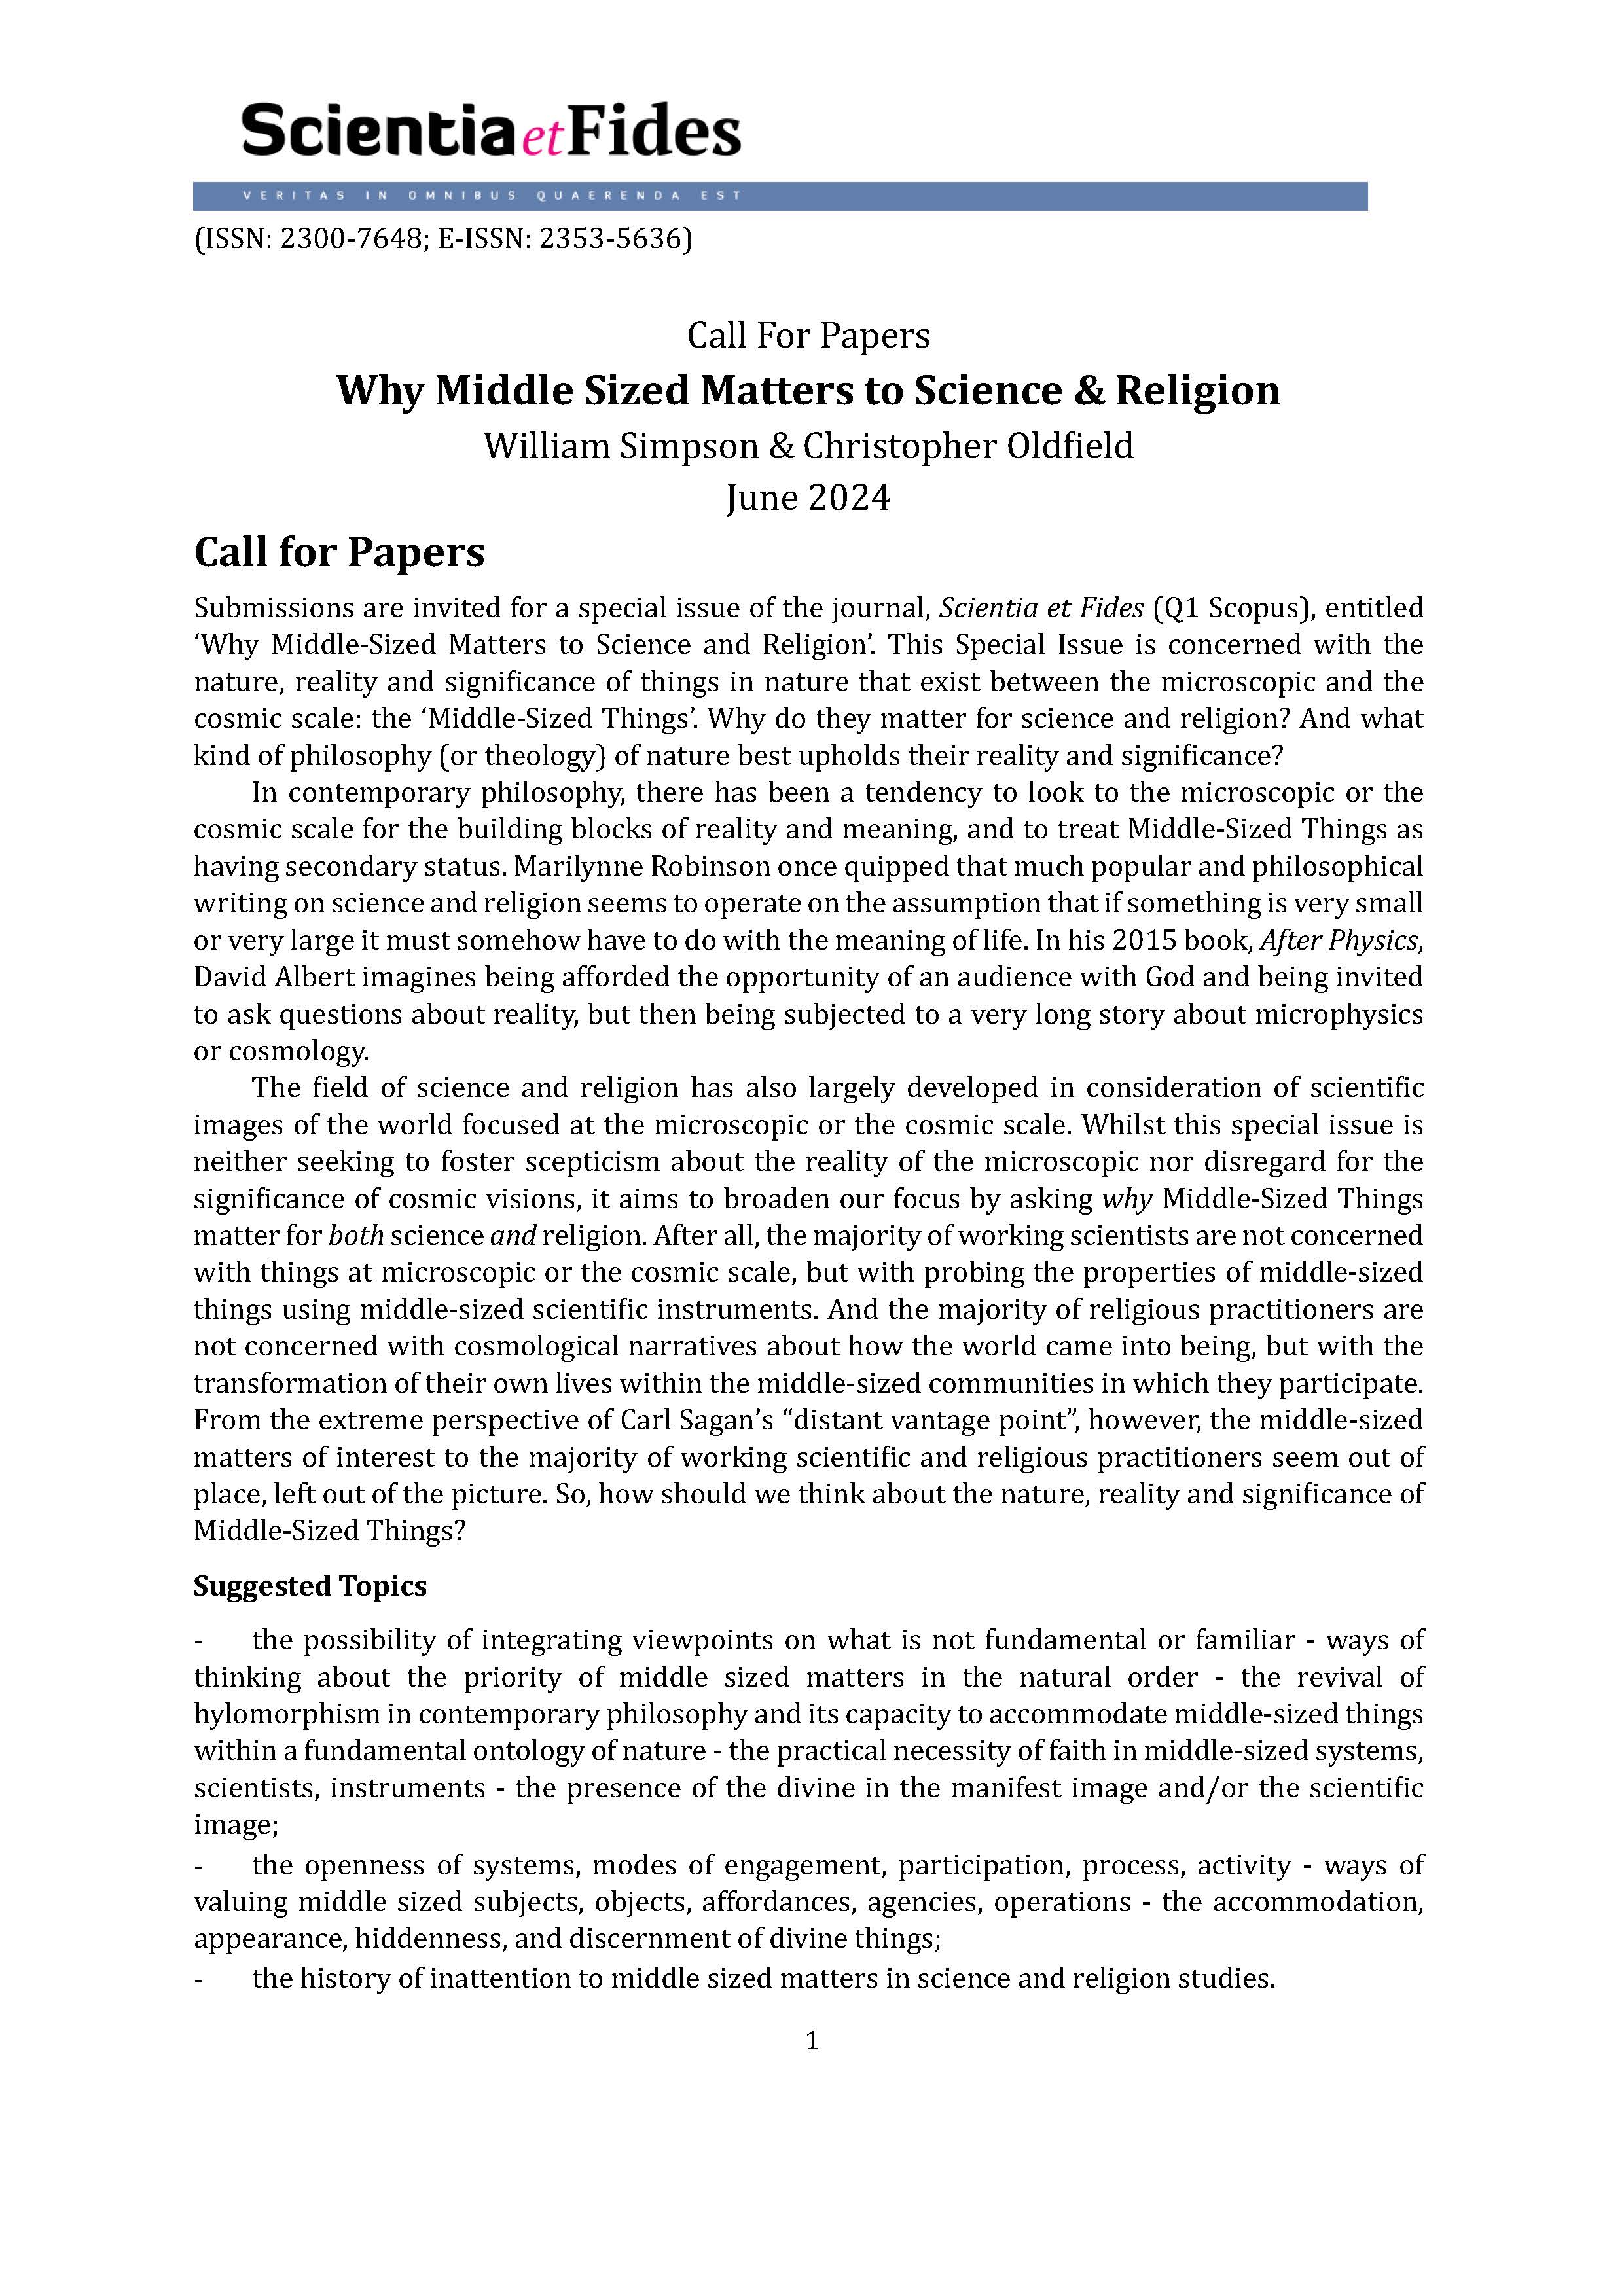 					View Call For Papers: Why Middle Sized Matters to Science & Religion
				